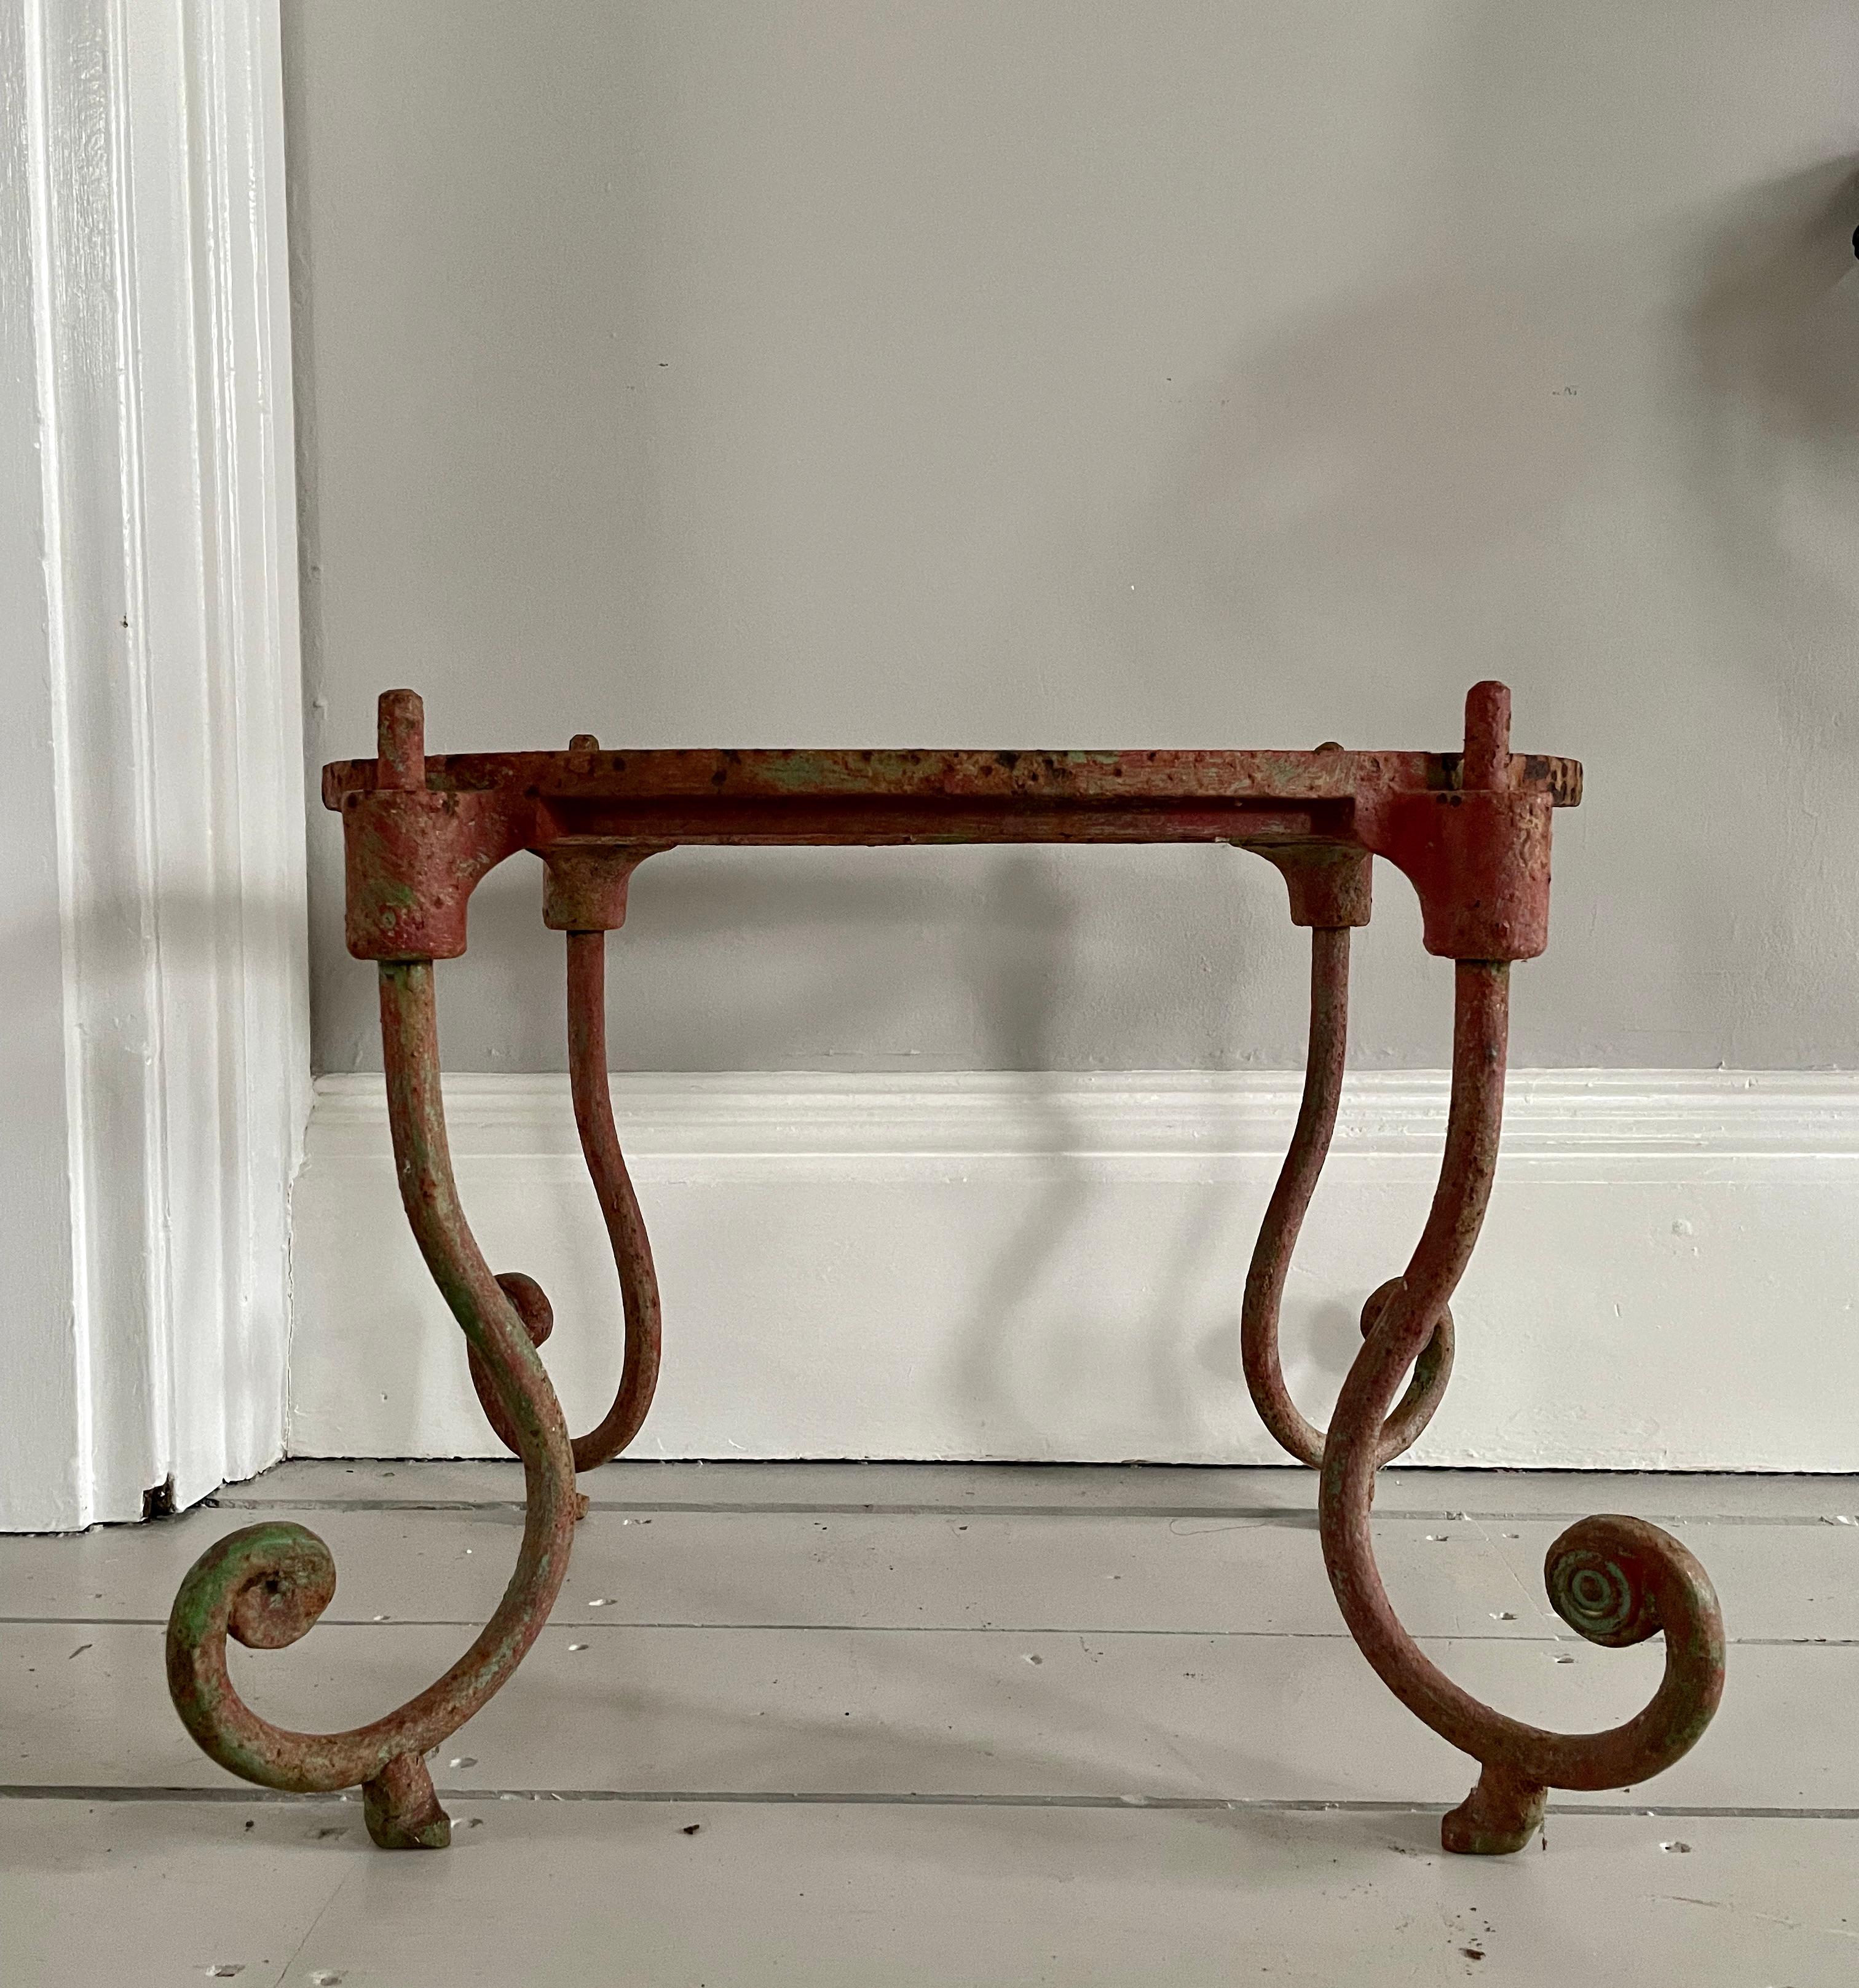 This substantive iron table base is a real honey and would be fabulous topped with a marble slab or thick glass top. In its original (and now faded) red-over-green paint with minor surface rusting, the lines are sinuous and the construction very